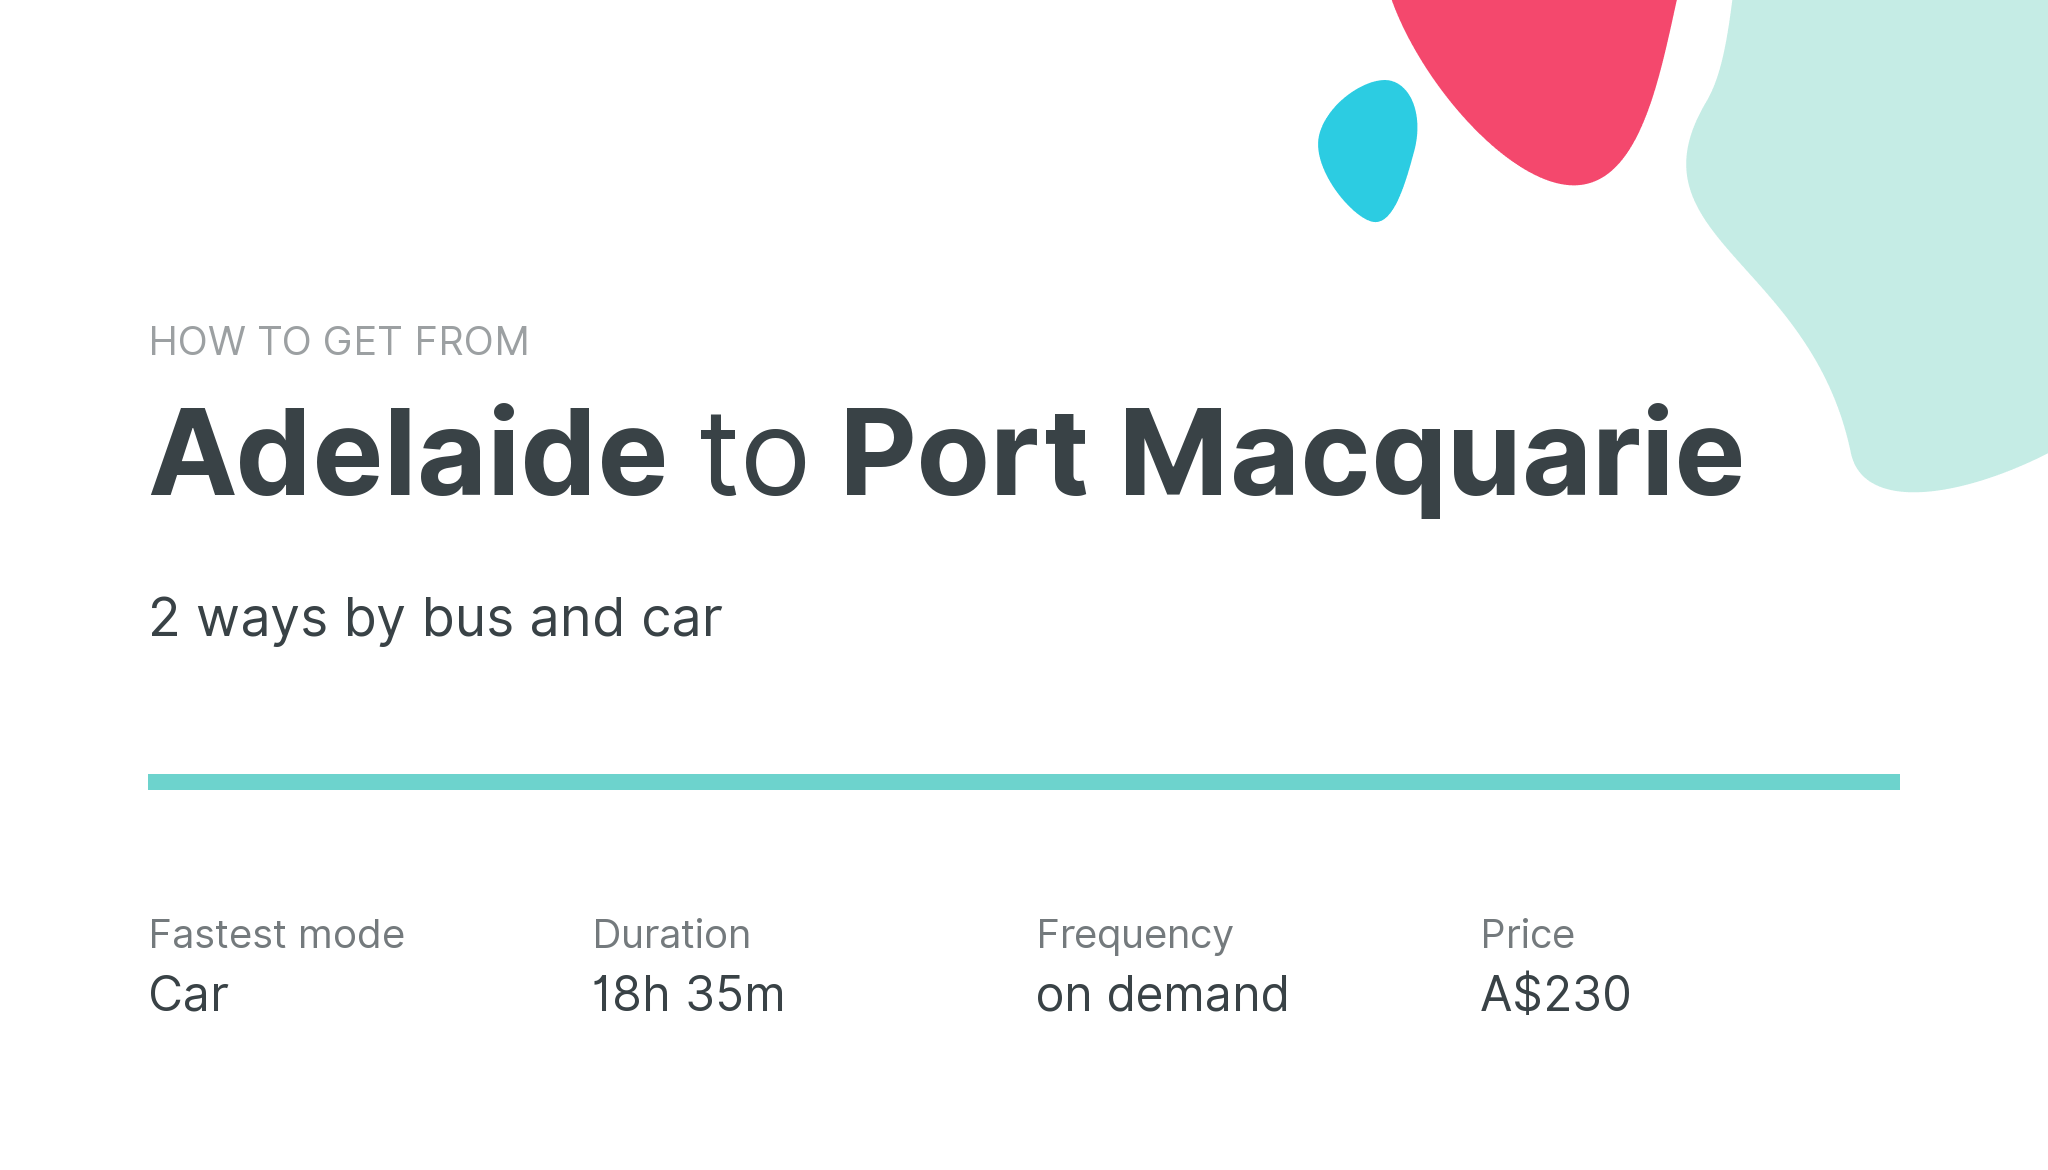 How do I get from Adelaide to Port Macquarie